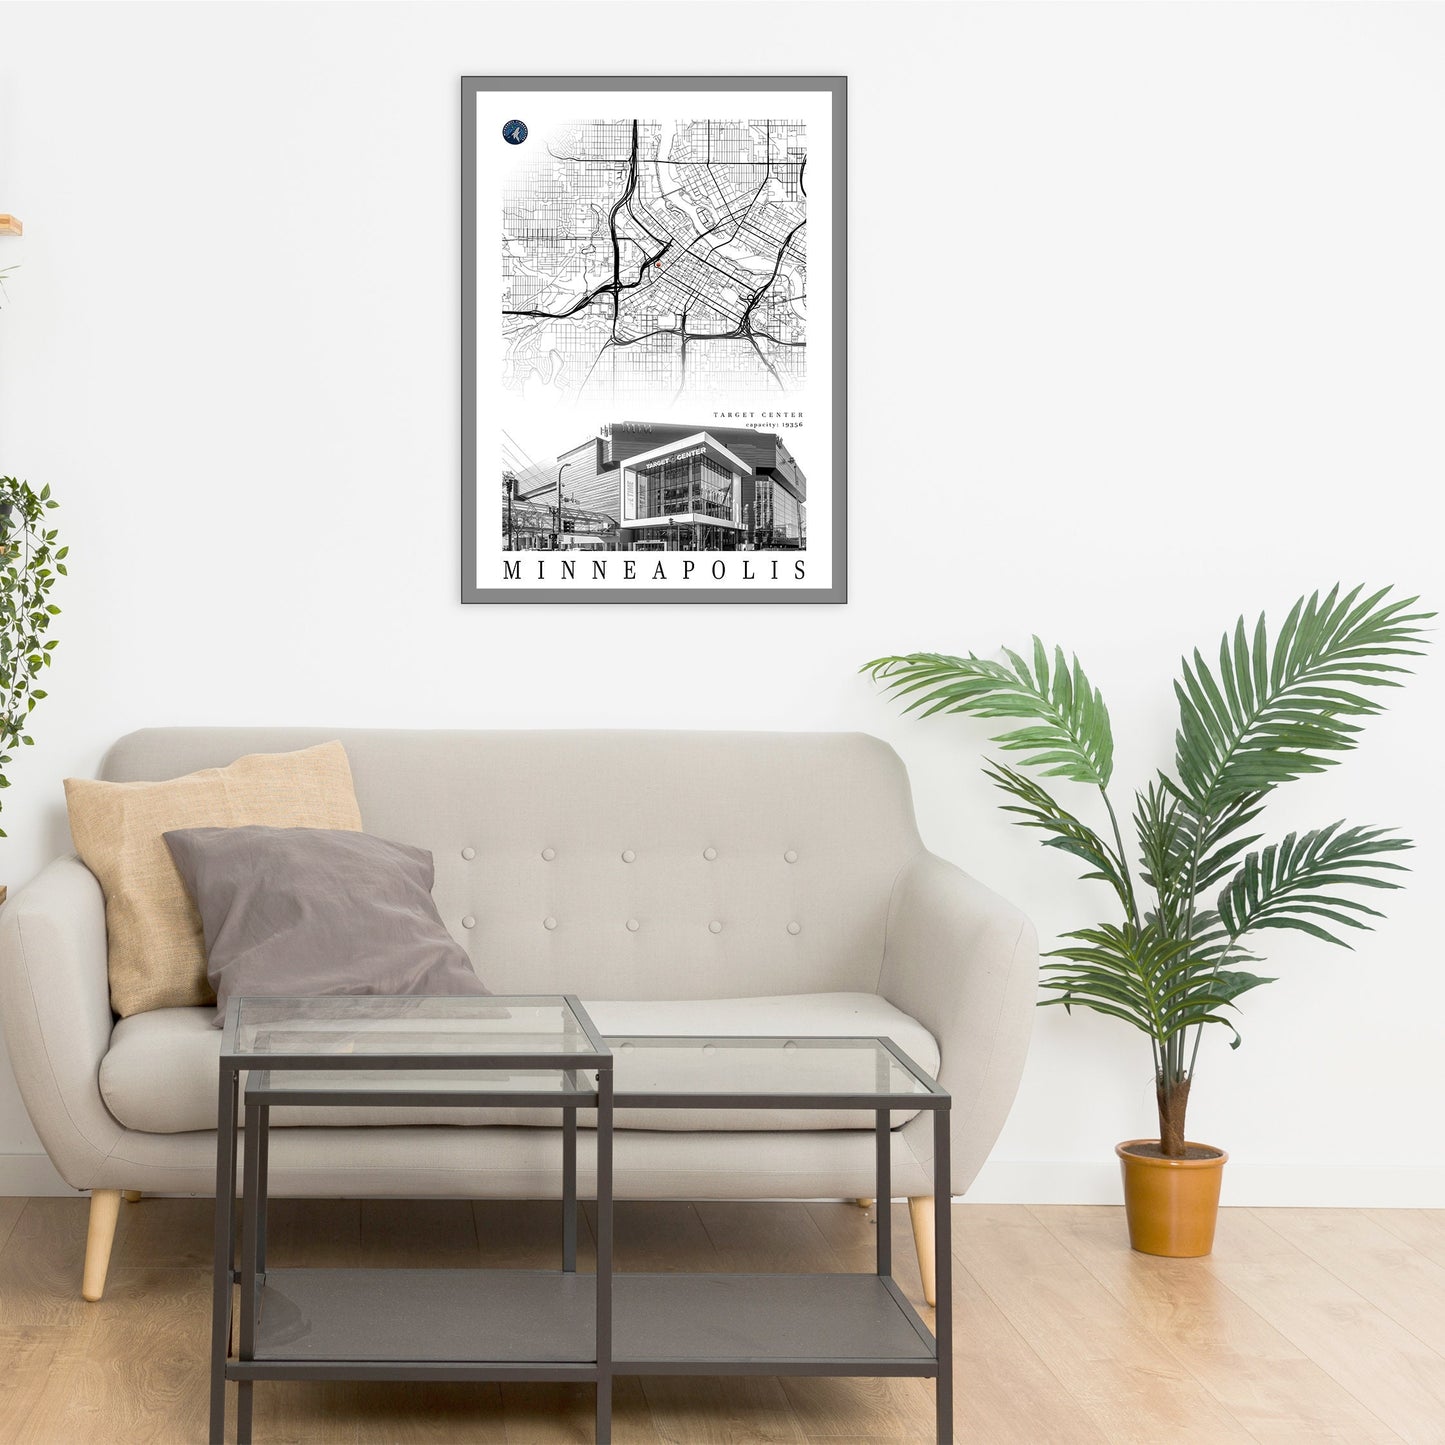 City map of MINNEAPOLIS - Target Center - Home Decor Minneapolis - Target Center wall decor - Minneapolis poster - Print map